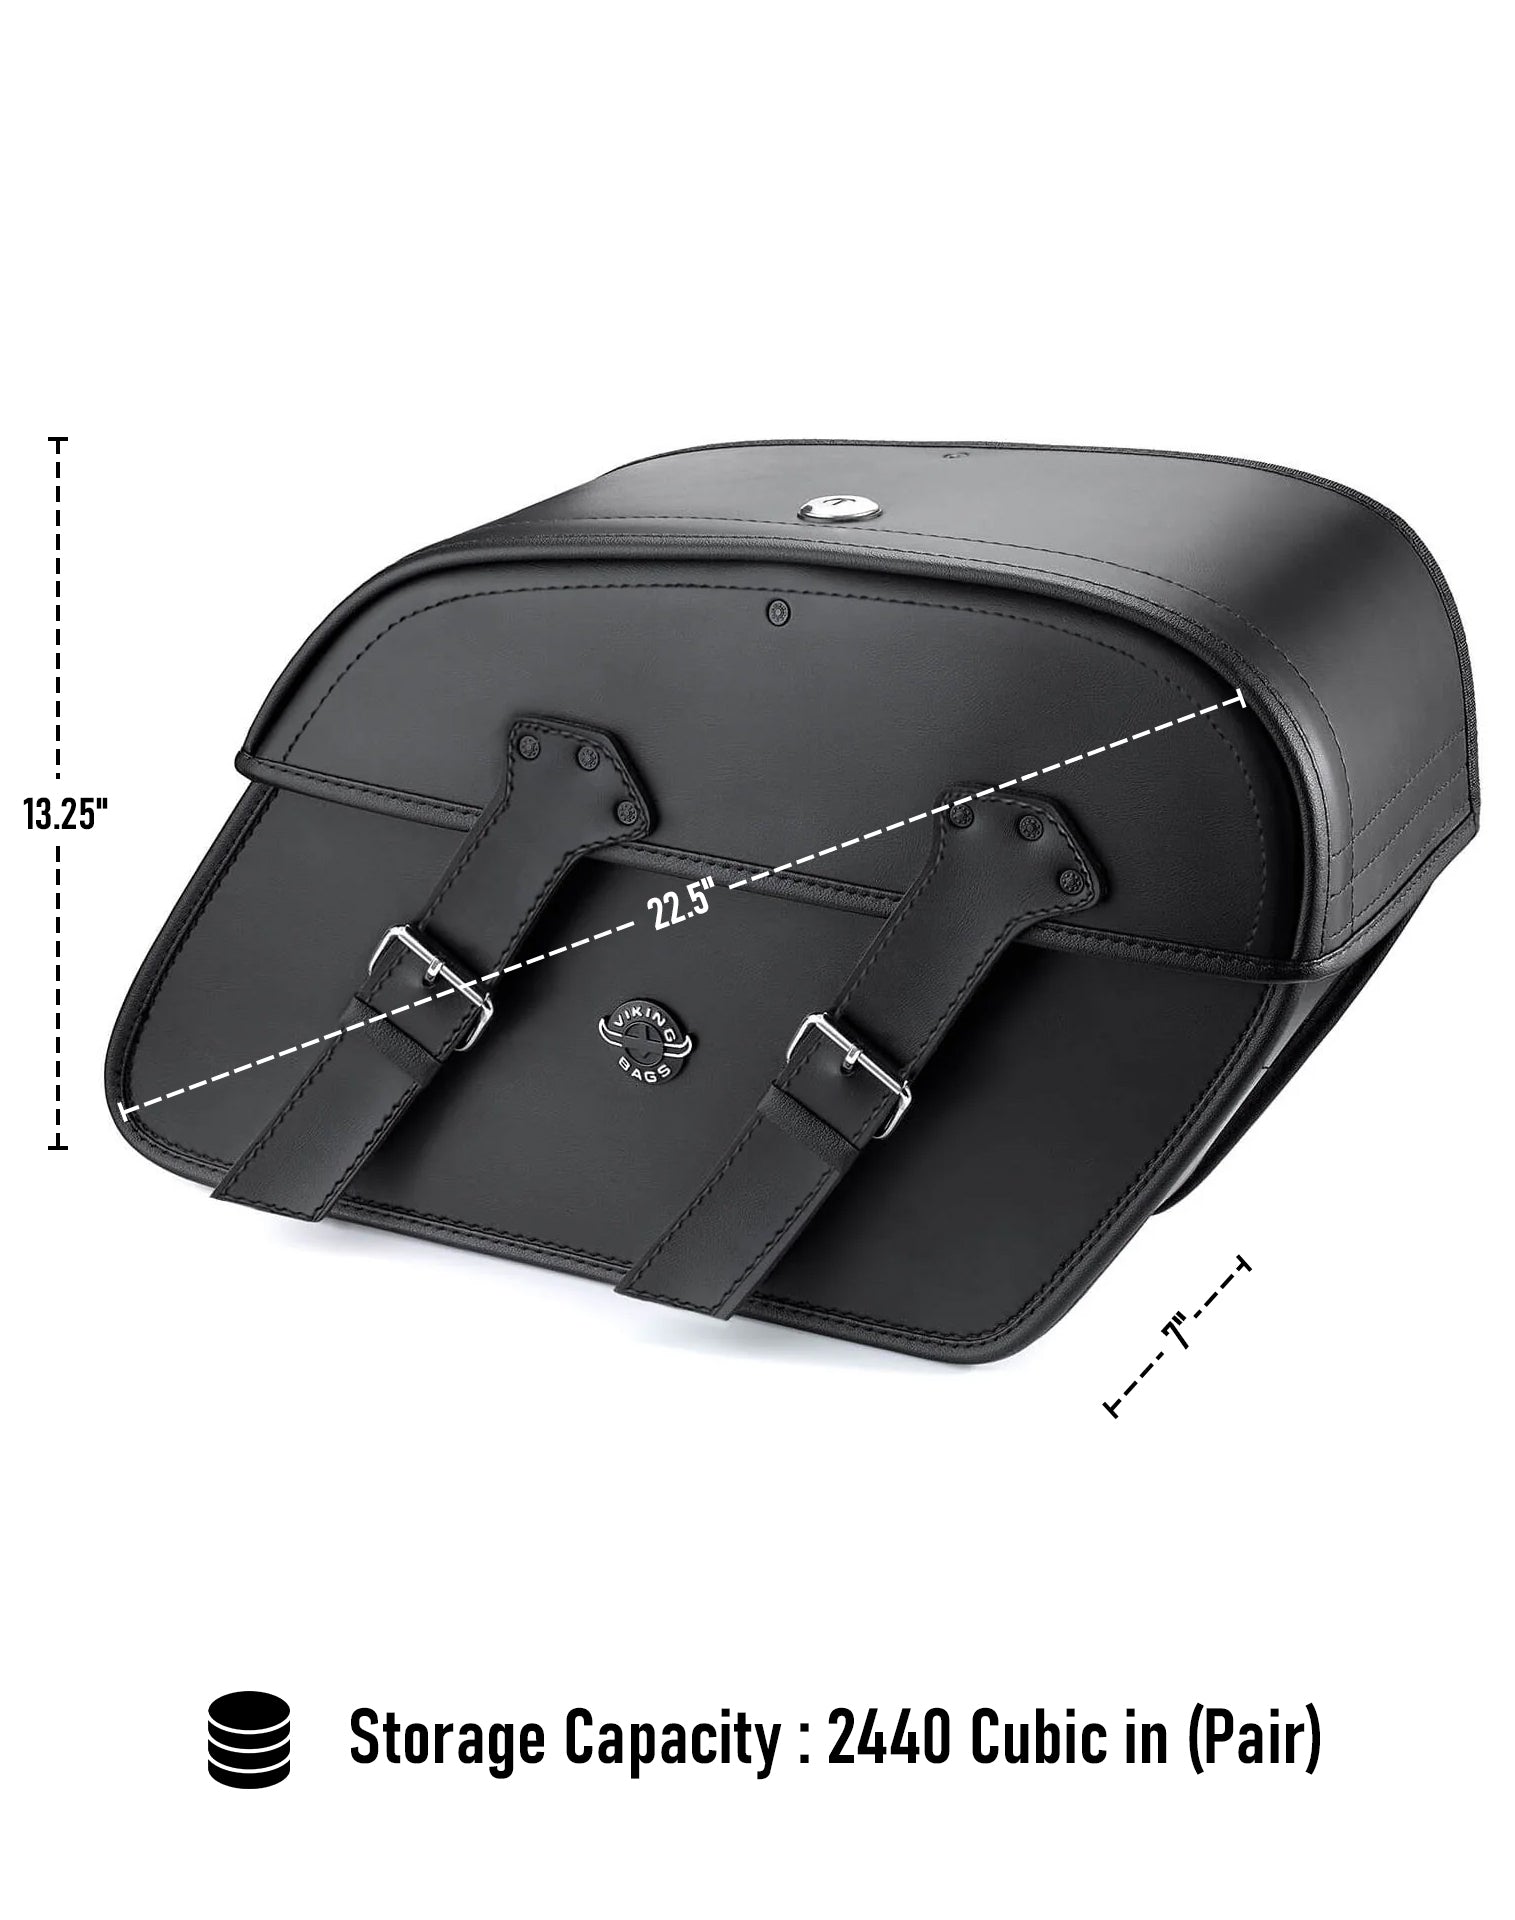 Viking Raven Extra Large Triumph Thunderbird 1700 Big Bore Leather Motorcycle Saddlebags Can Store Your Ridings Gears